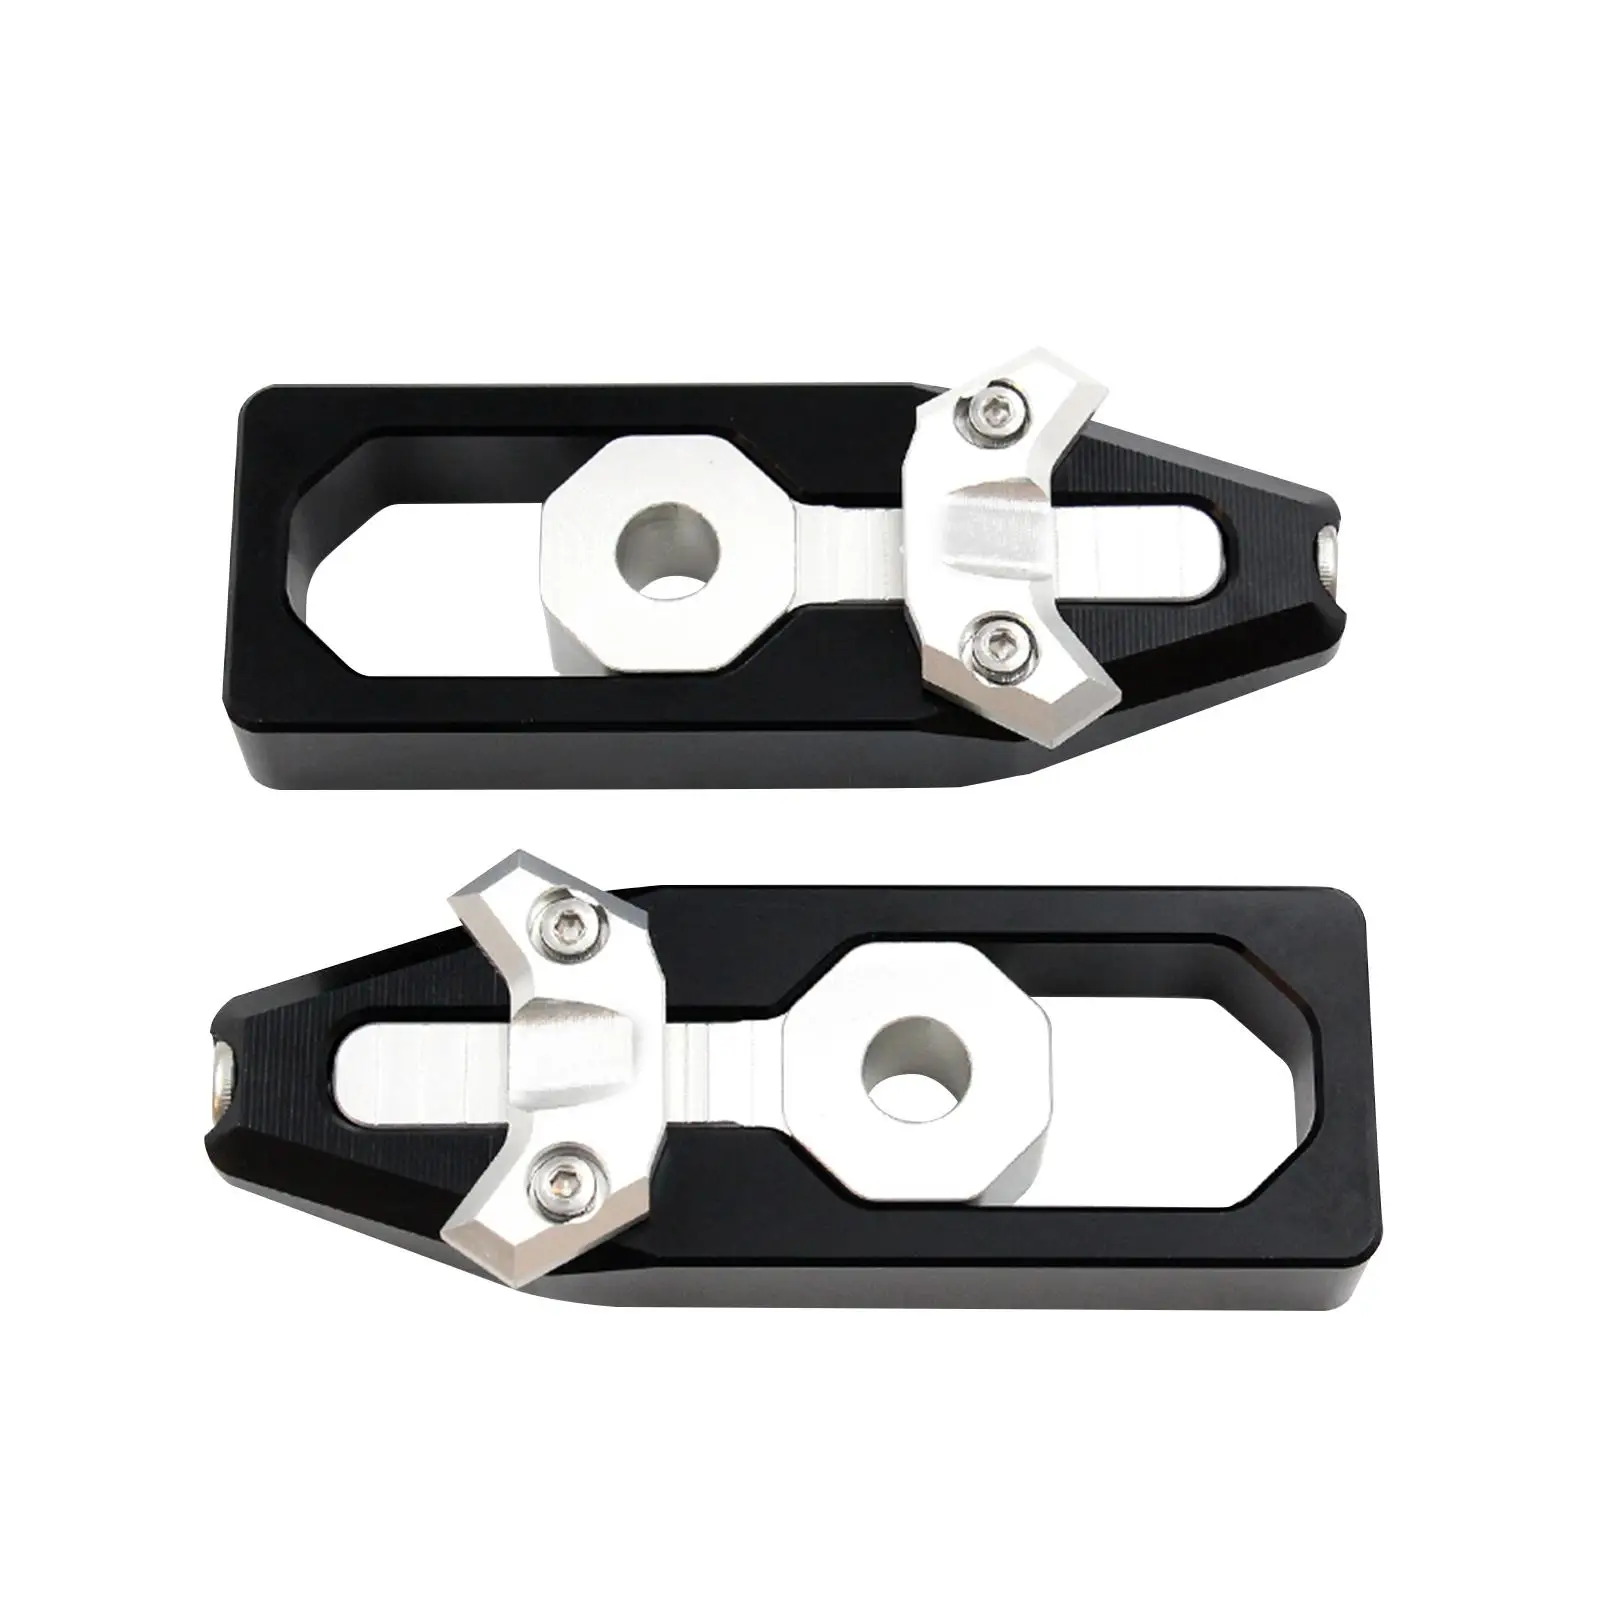 2x Chain Tensioner High Performance Easy to Install Professional Chain Adjuster